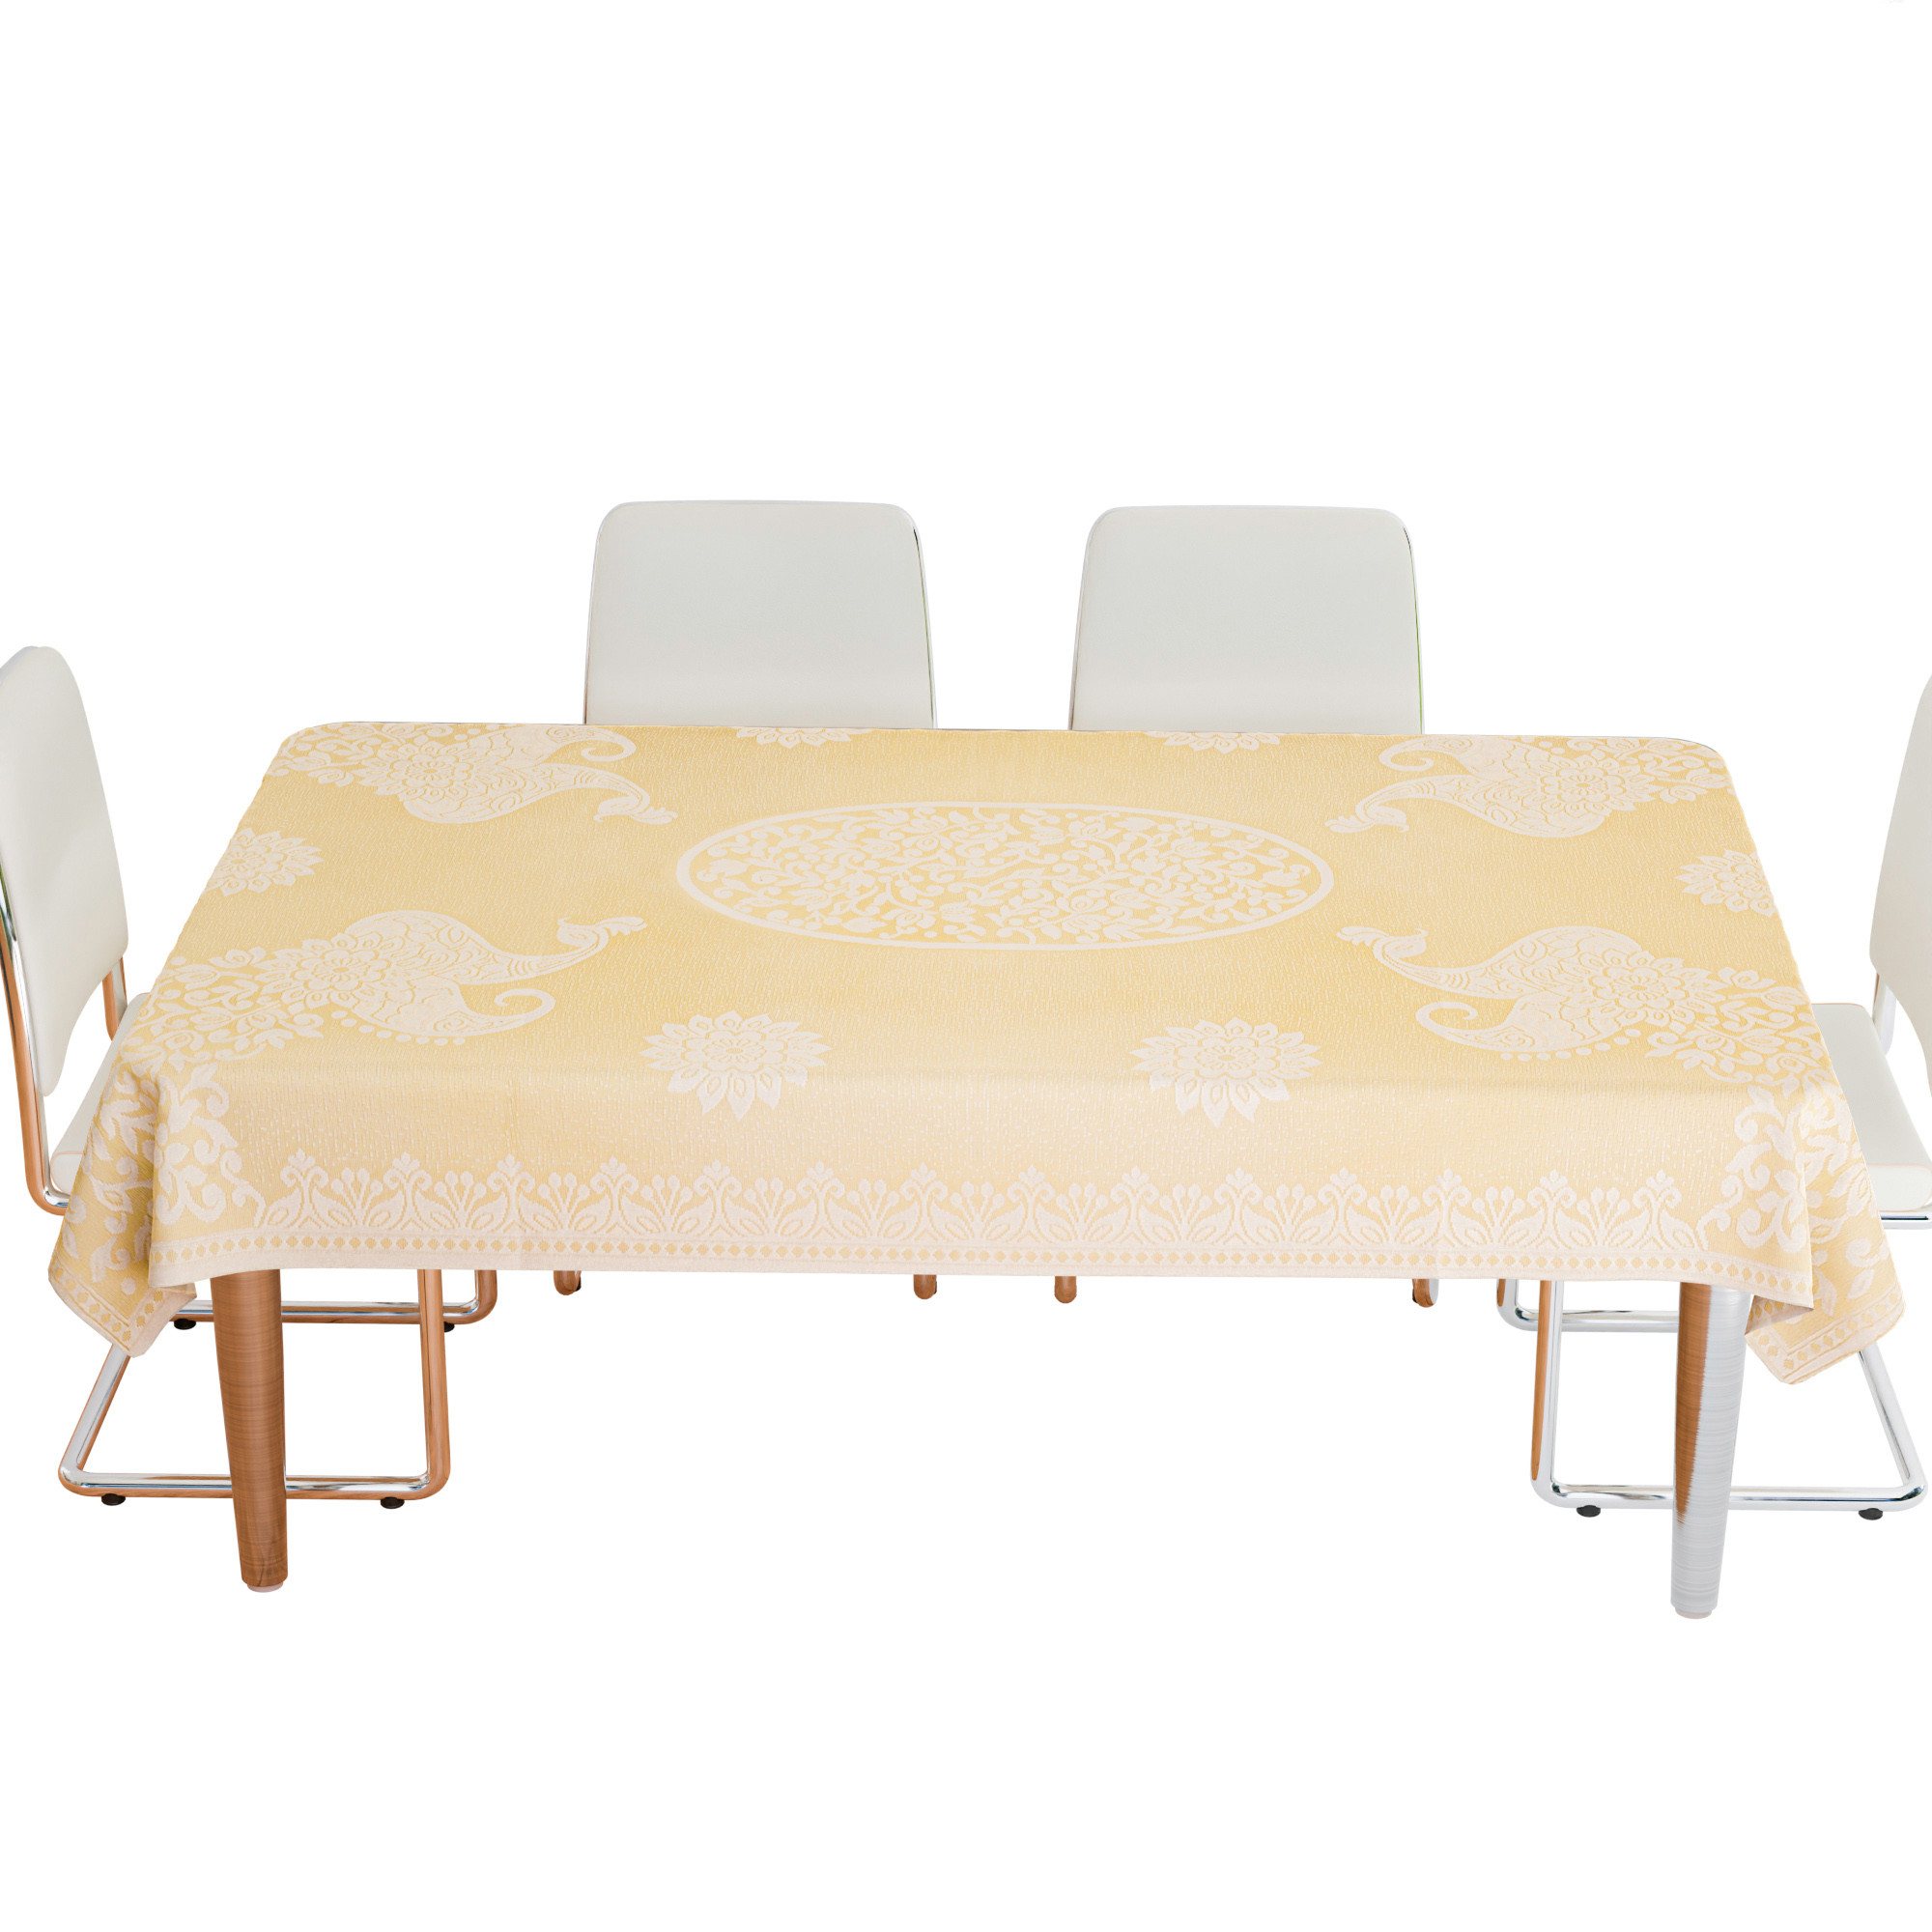 Kuber Industries Dining Table Cover | 6-Seater Table Cover | Net Table Protector Cover | Table Cover for Kitchen | Table Cover for Hall Décor | Peacock-Design | 60x90 Inch | DTC | Cream